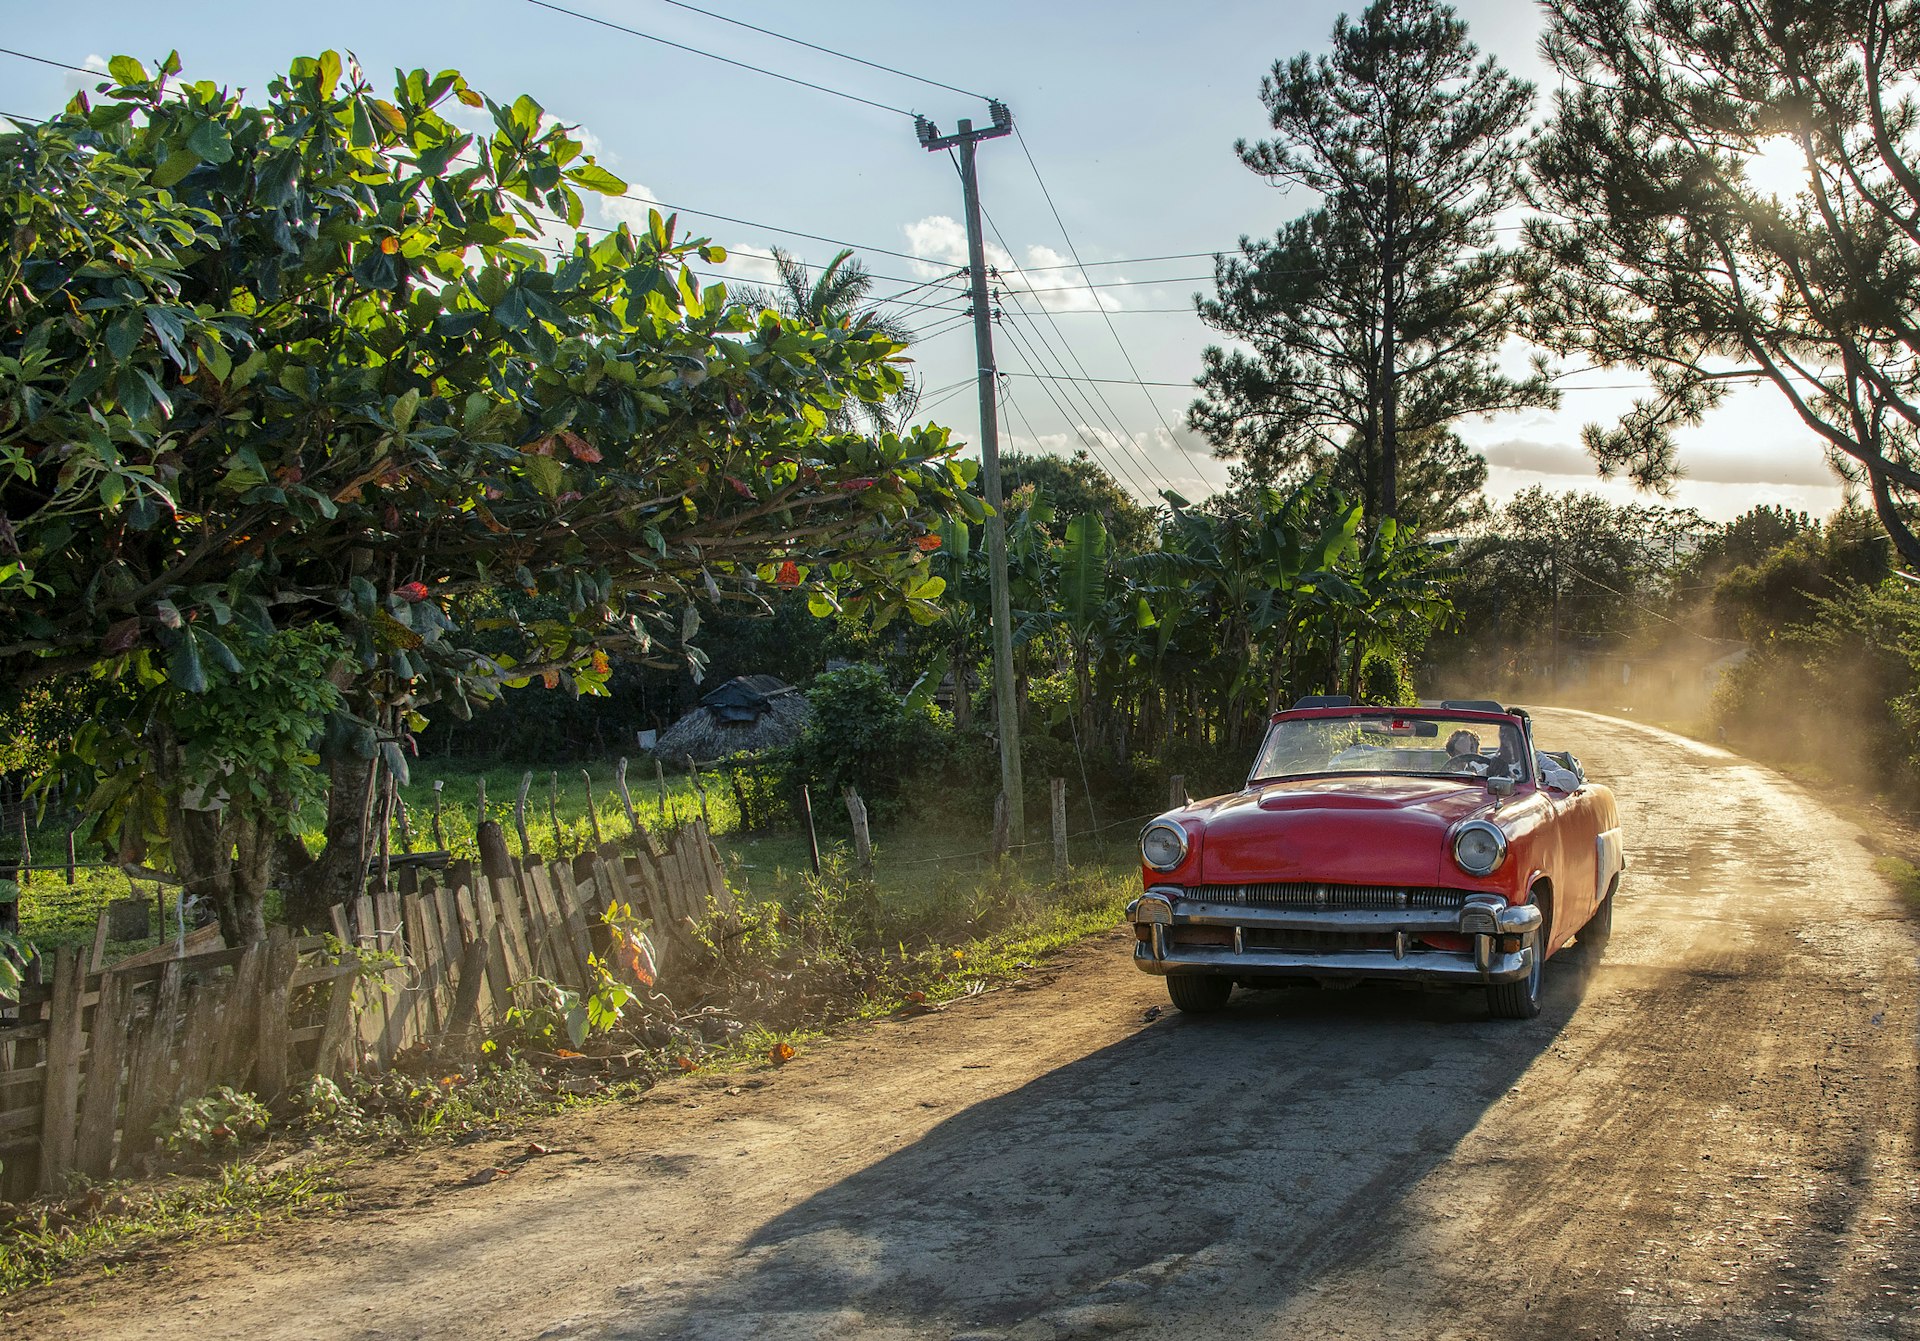 Vintage car in Vinales -- a beautiful and lush valley in Pinar del Río province of Cuba